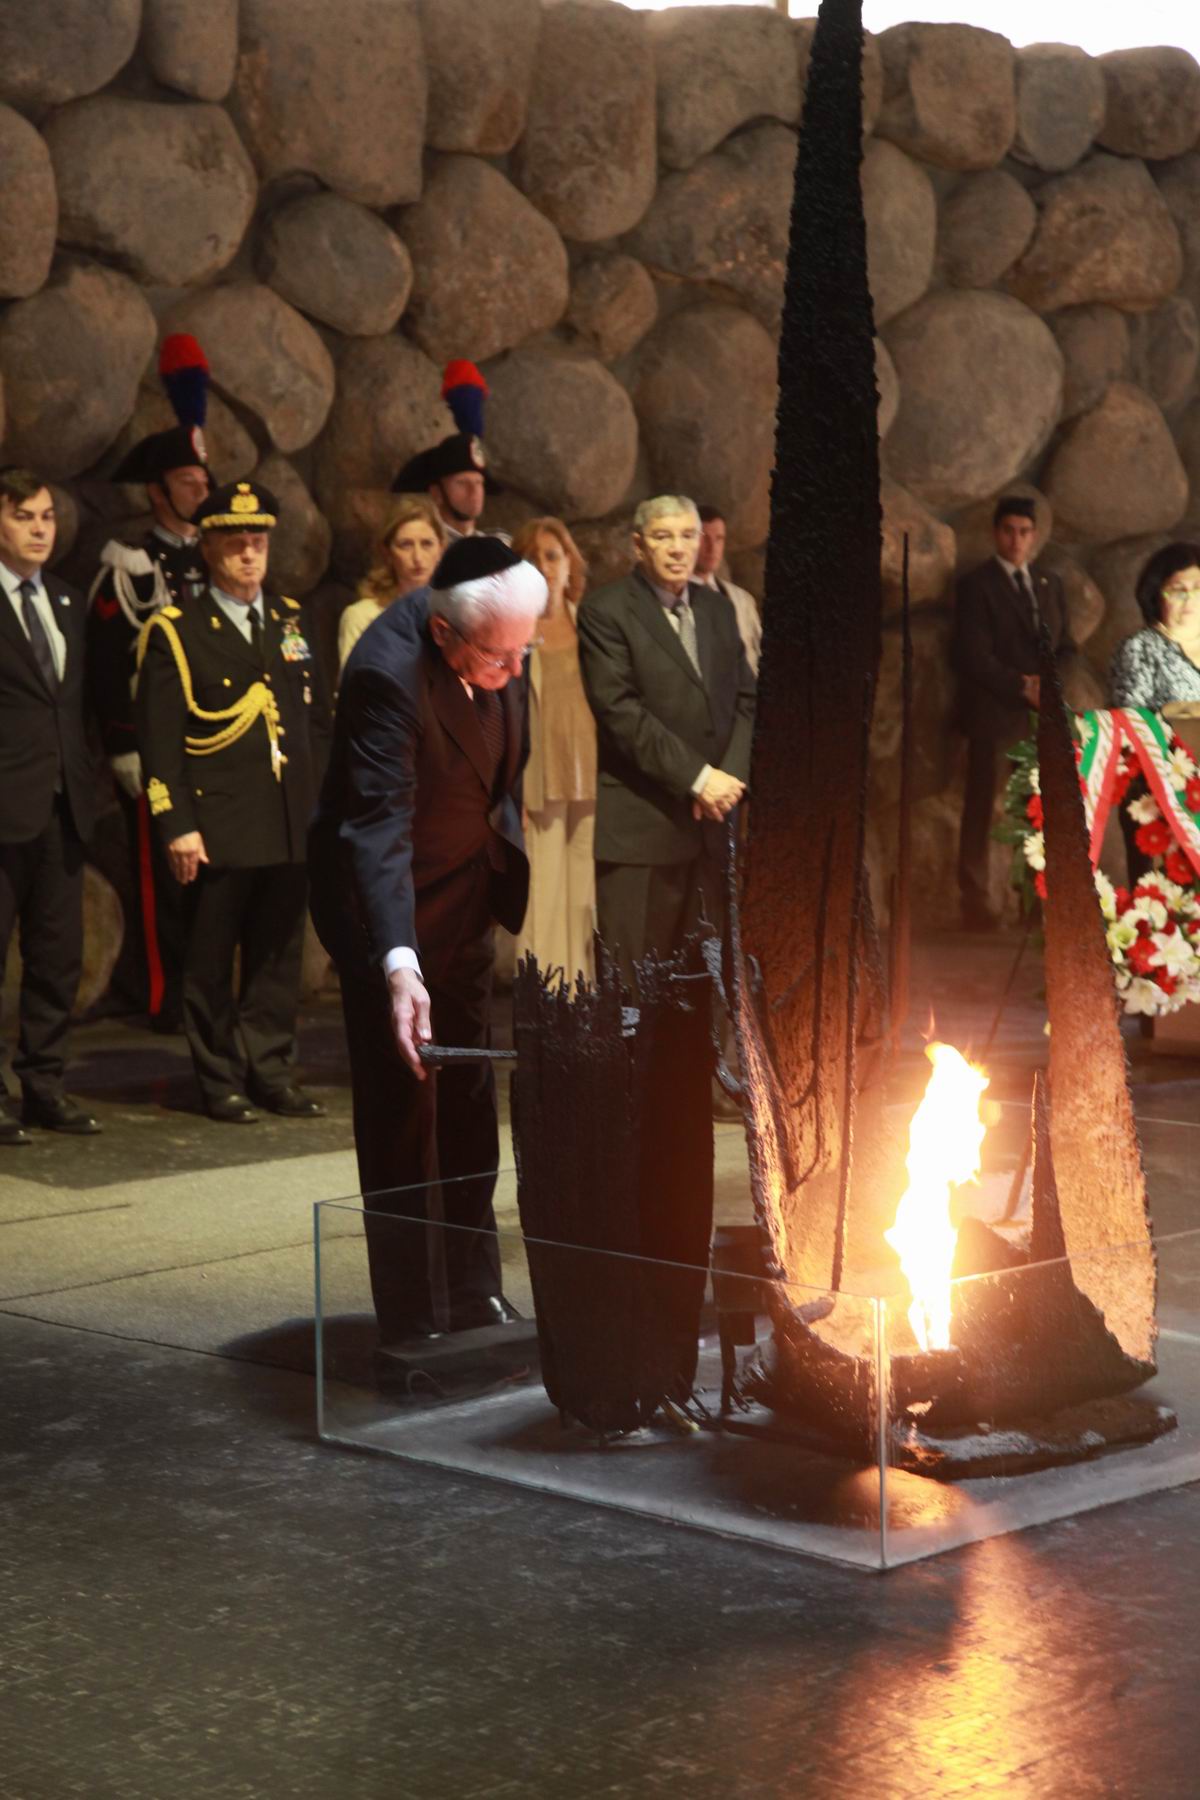 President Mattarella was honored to rekindle the Eternal Flame in the Hall of Remembrance